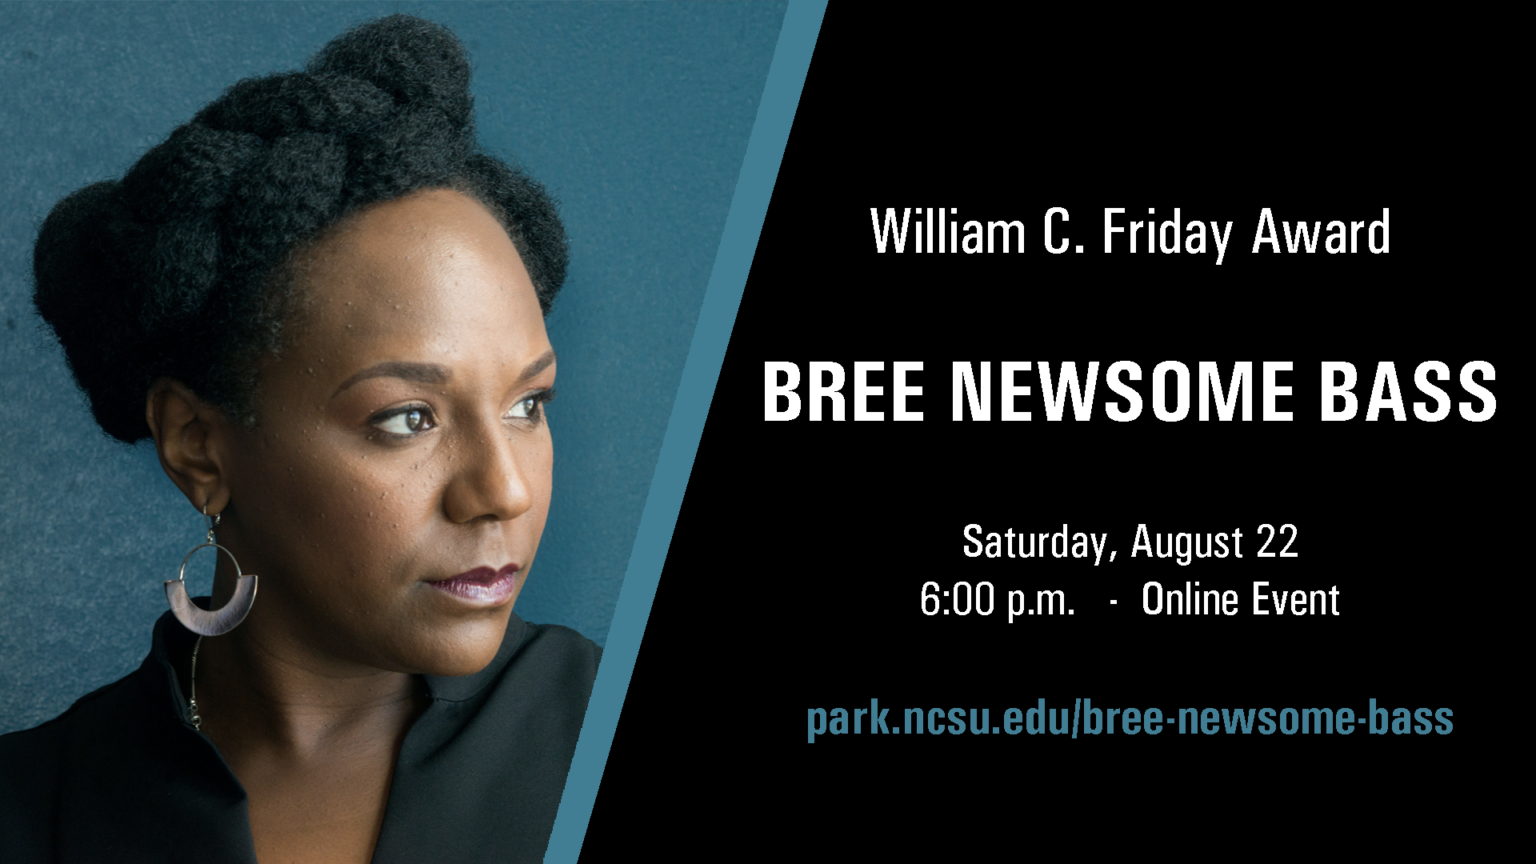 Event banner featuring headshot of Bree Newsome Bass and date of August 22